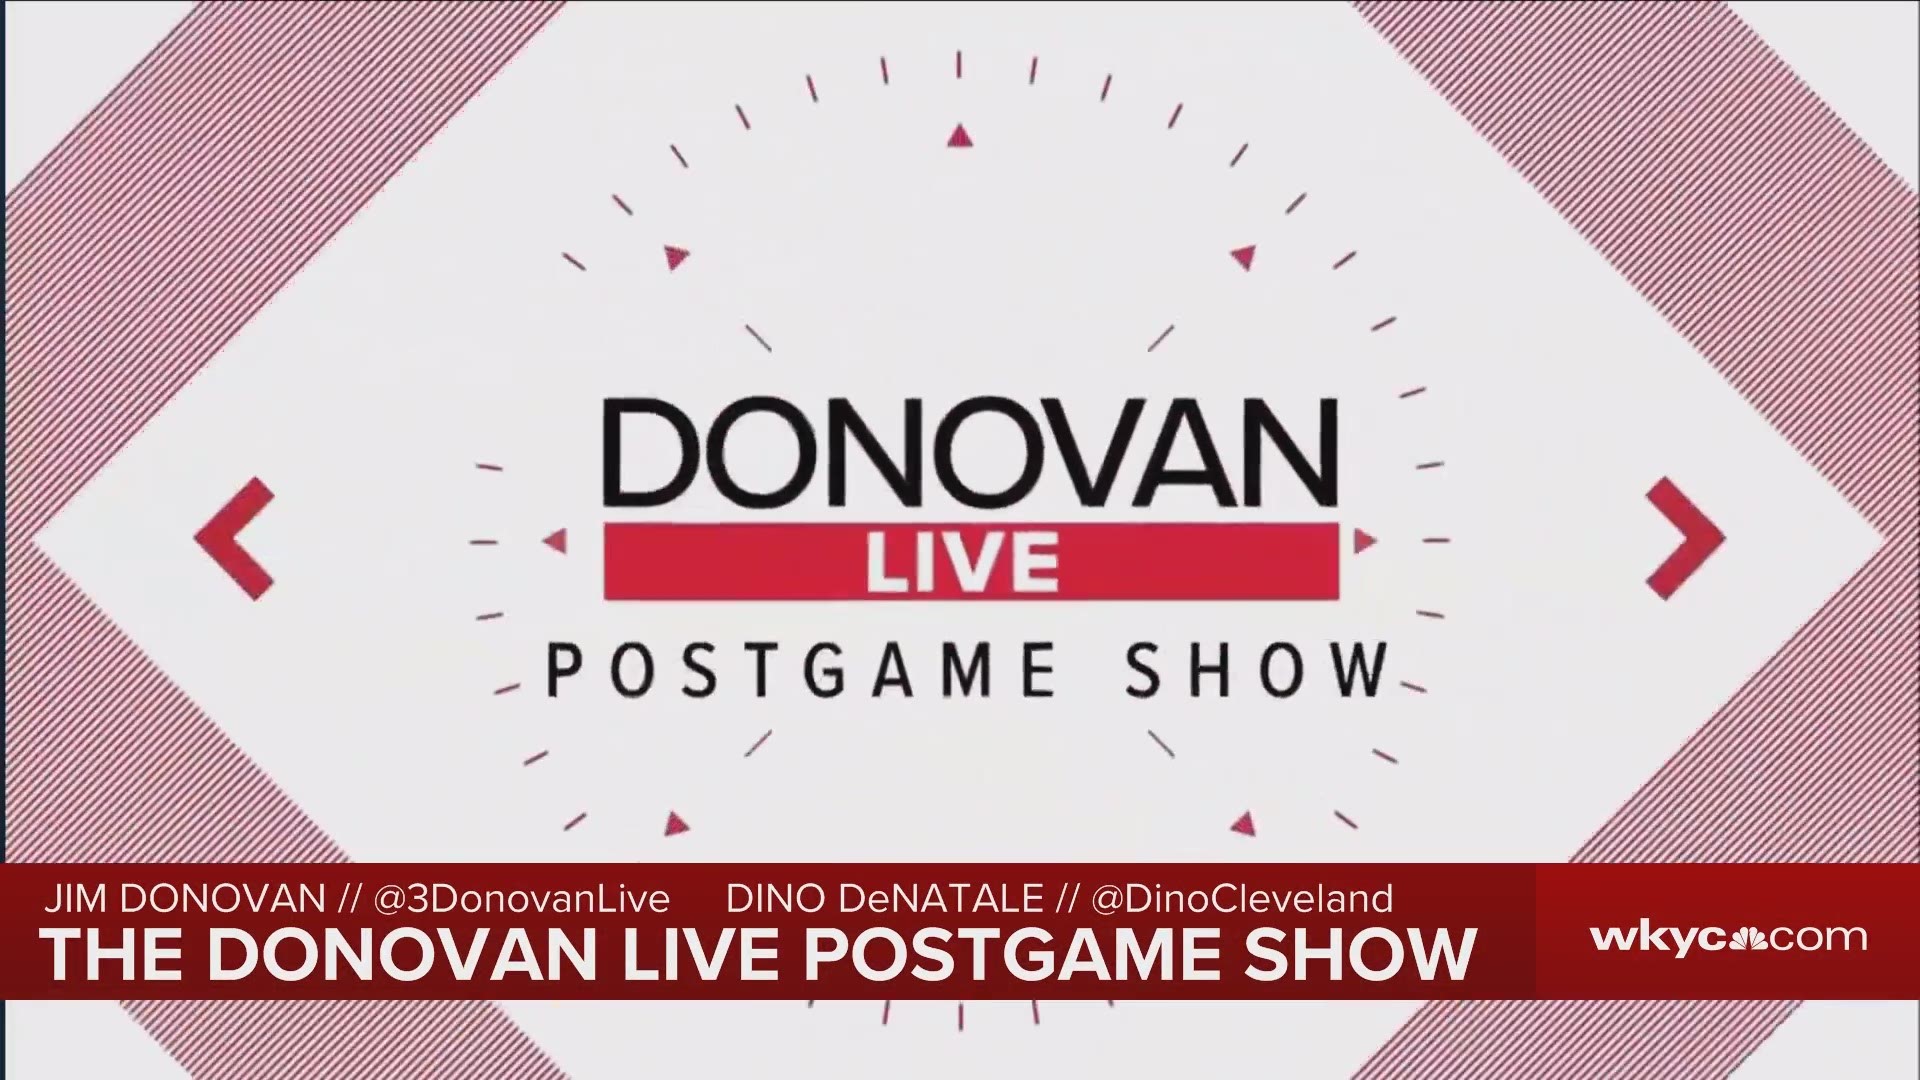 Salute to Cleveland Indians' AL Central title: The Donovan Live Postgame Show